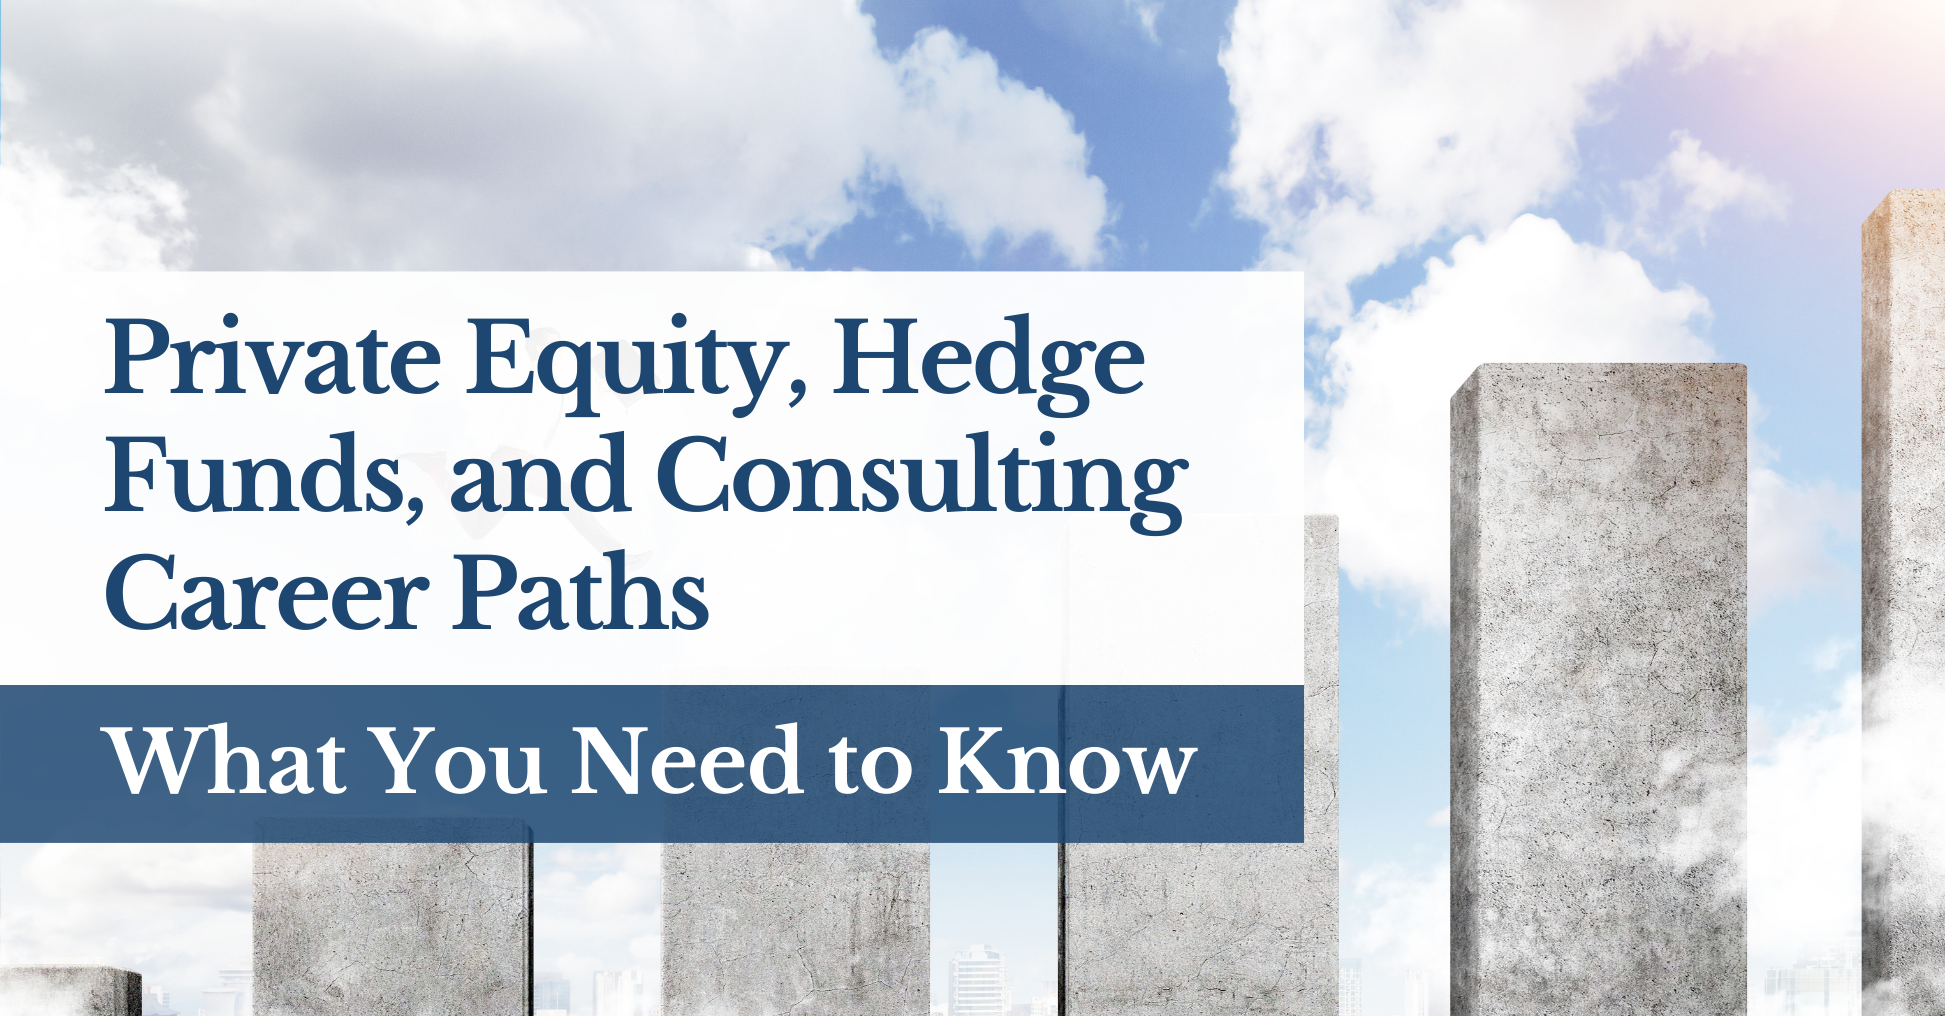 Private Equity, Hedge Funds, and Consulting Career Paths